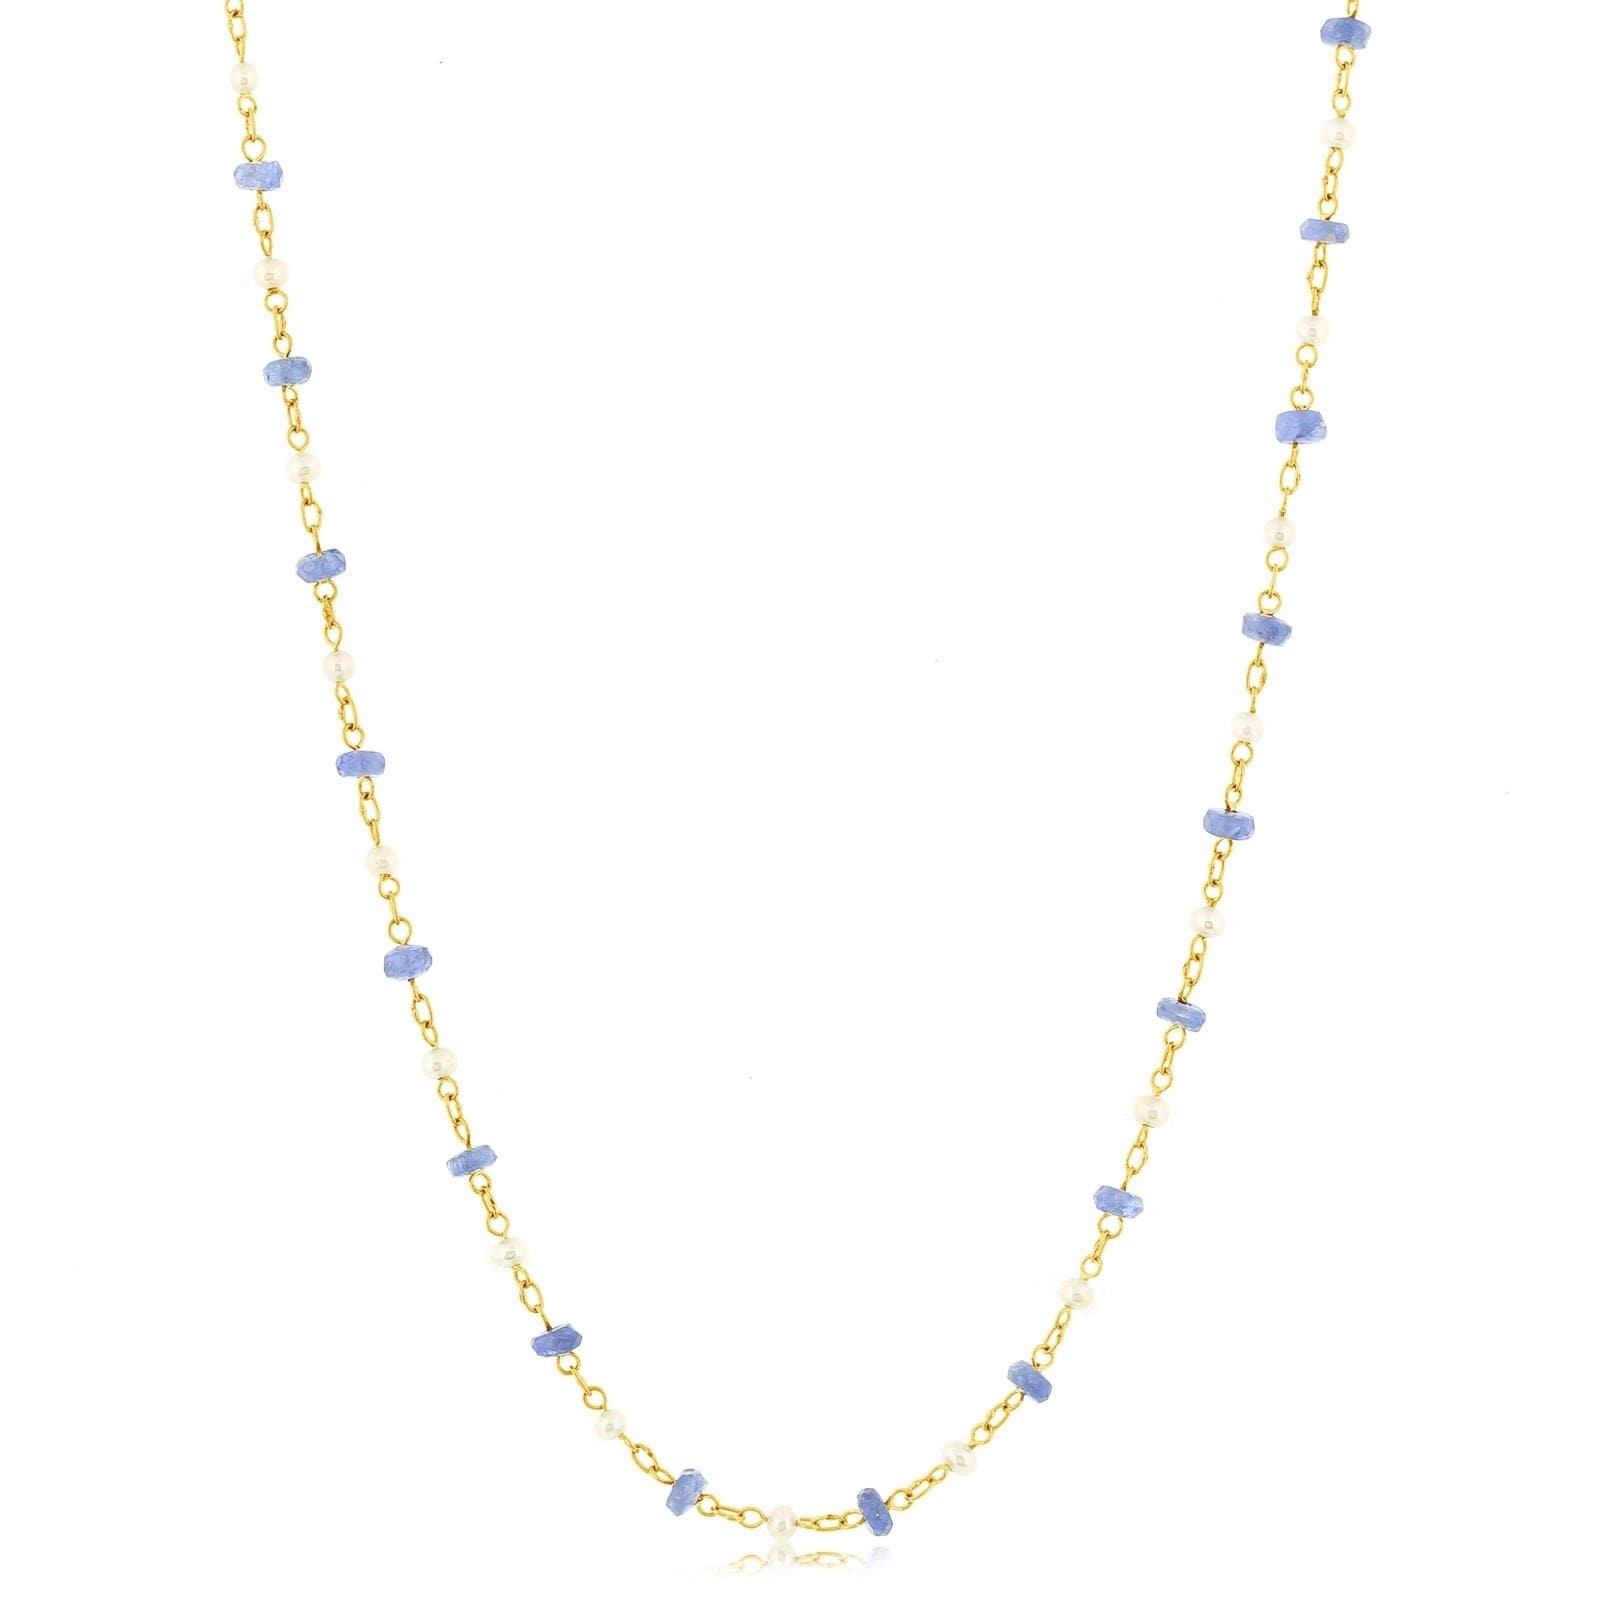 Amazon.com: 3 Strand Genuine Blue Sapphire Necklace - Faceted Rondelle Beads -Sapphire Beaded Necklace-Stunning Elegant Blue Stone Necklace-Gift Jewelry:  Clothing, Shoes & Jewelry